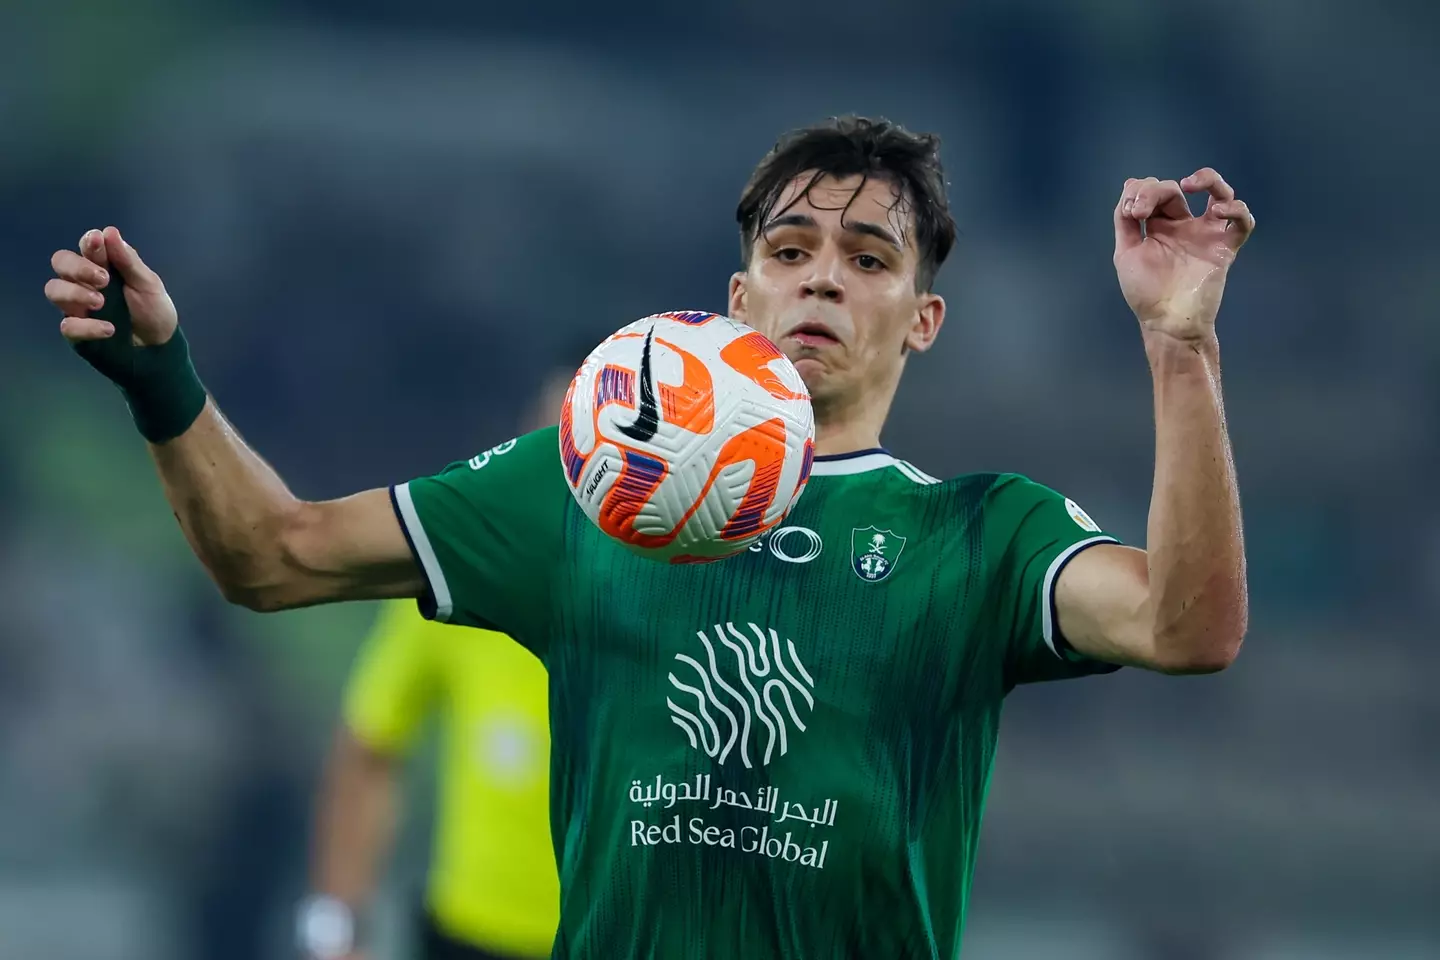 21-year-old Gabri Veiga is one of few young players to move to Saudi Arabia - a strategy they're looking to focus more on. (Image